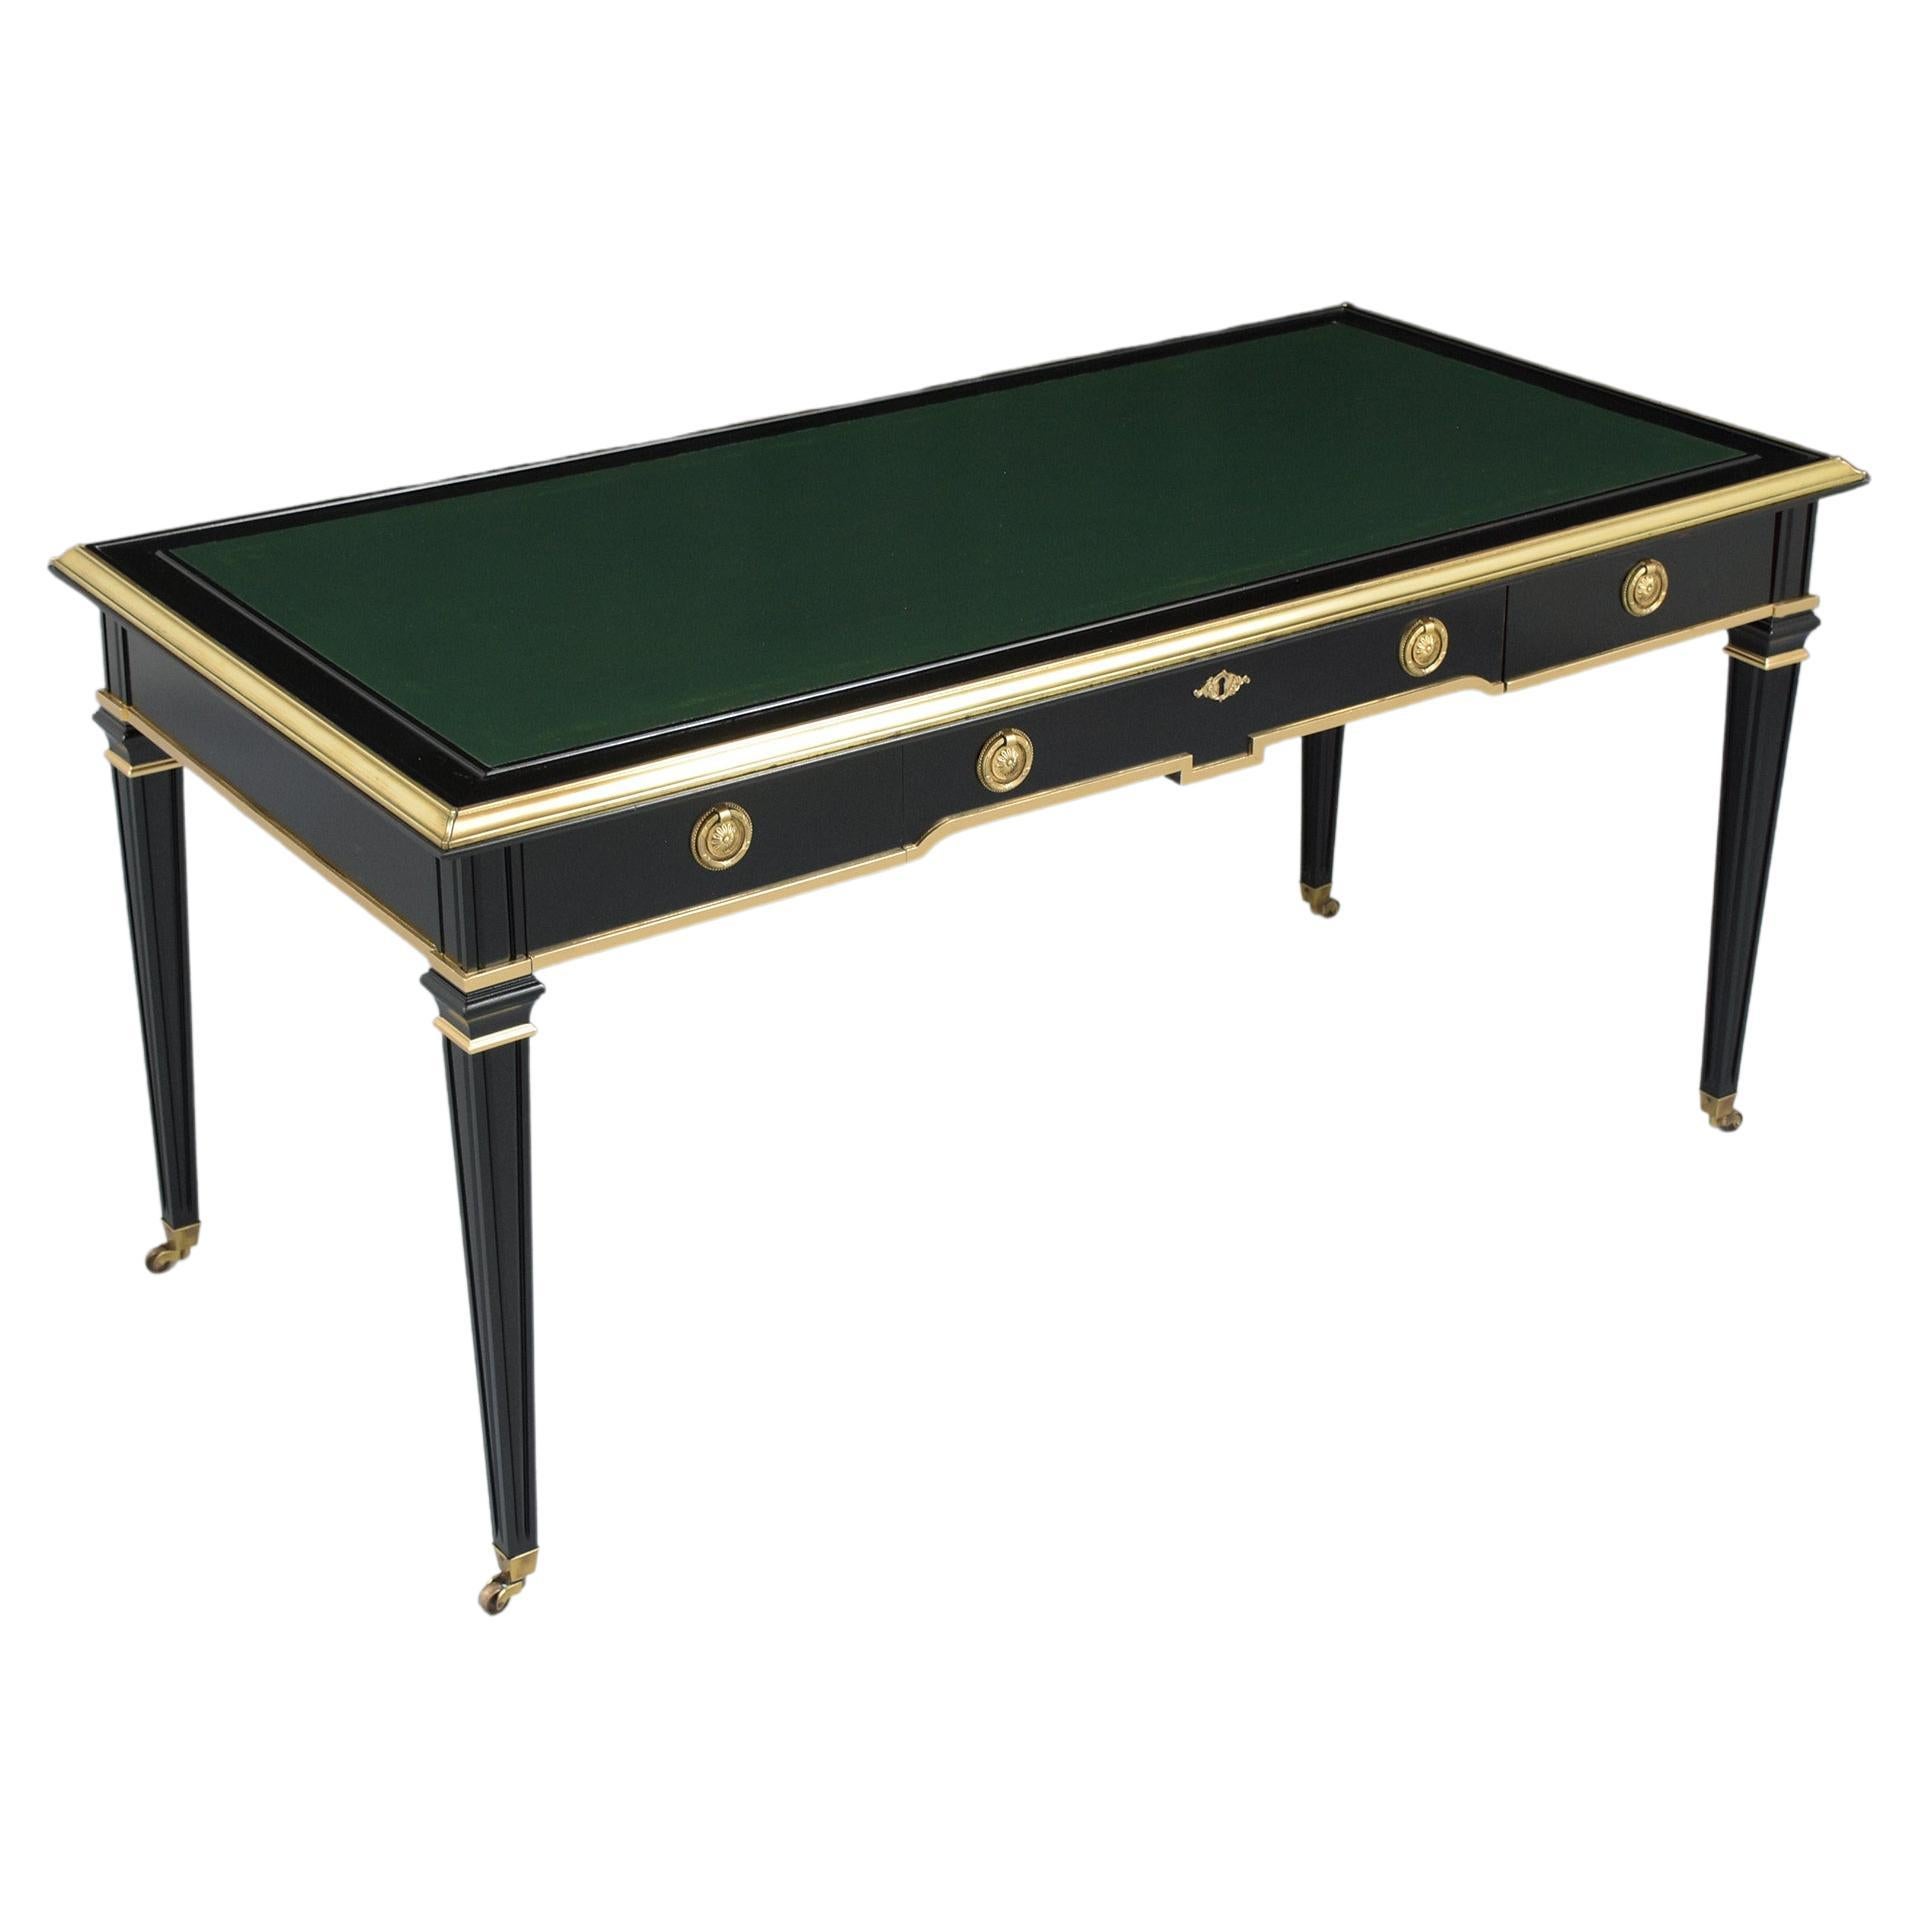 This extraordinary 1950s Louis XVI style leather desk is in great condition beautifully crafted out of mahogany wood and has been professionally restored by our expert craftsmen team. This desk is eye-catching and features an elegant ebonized